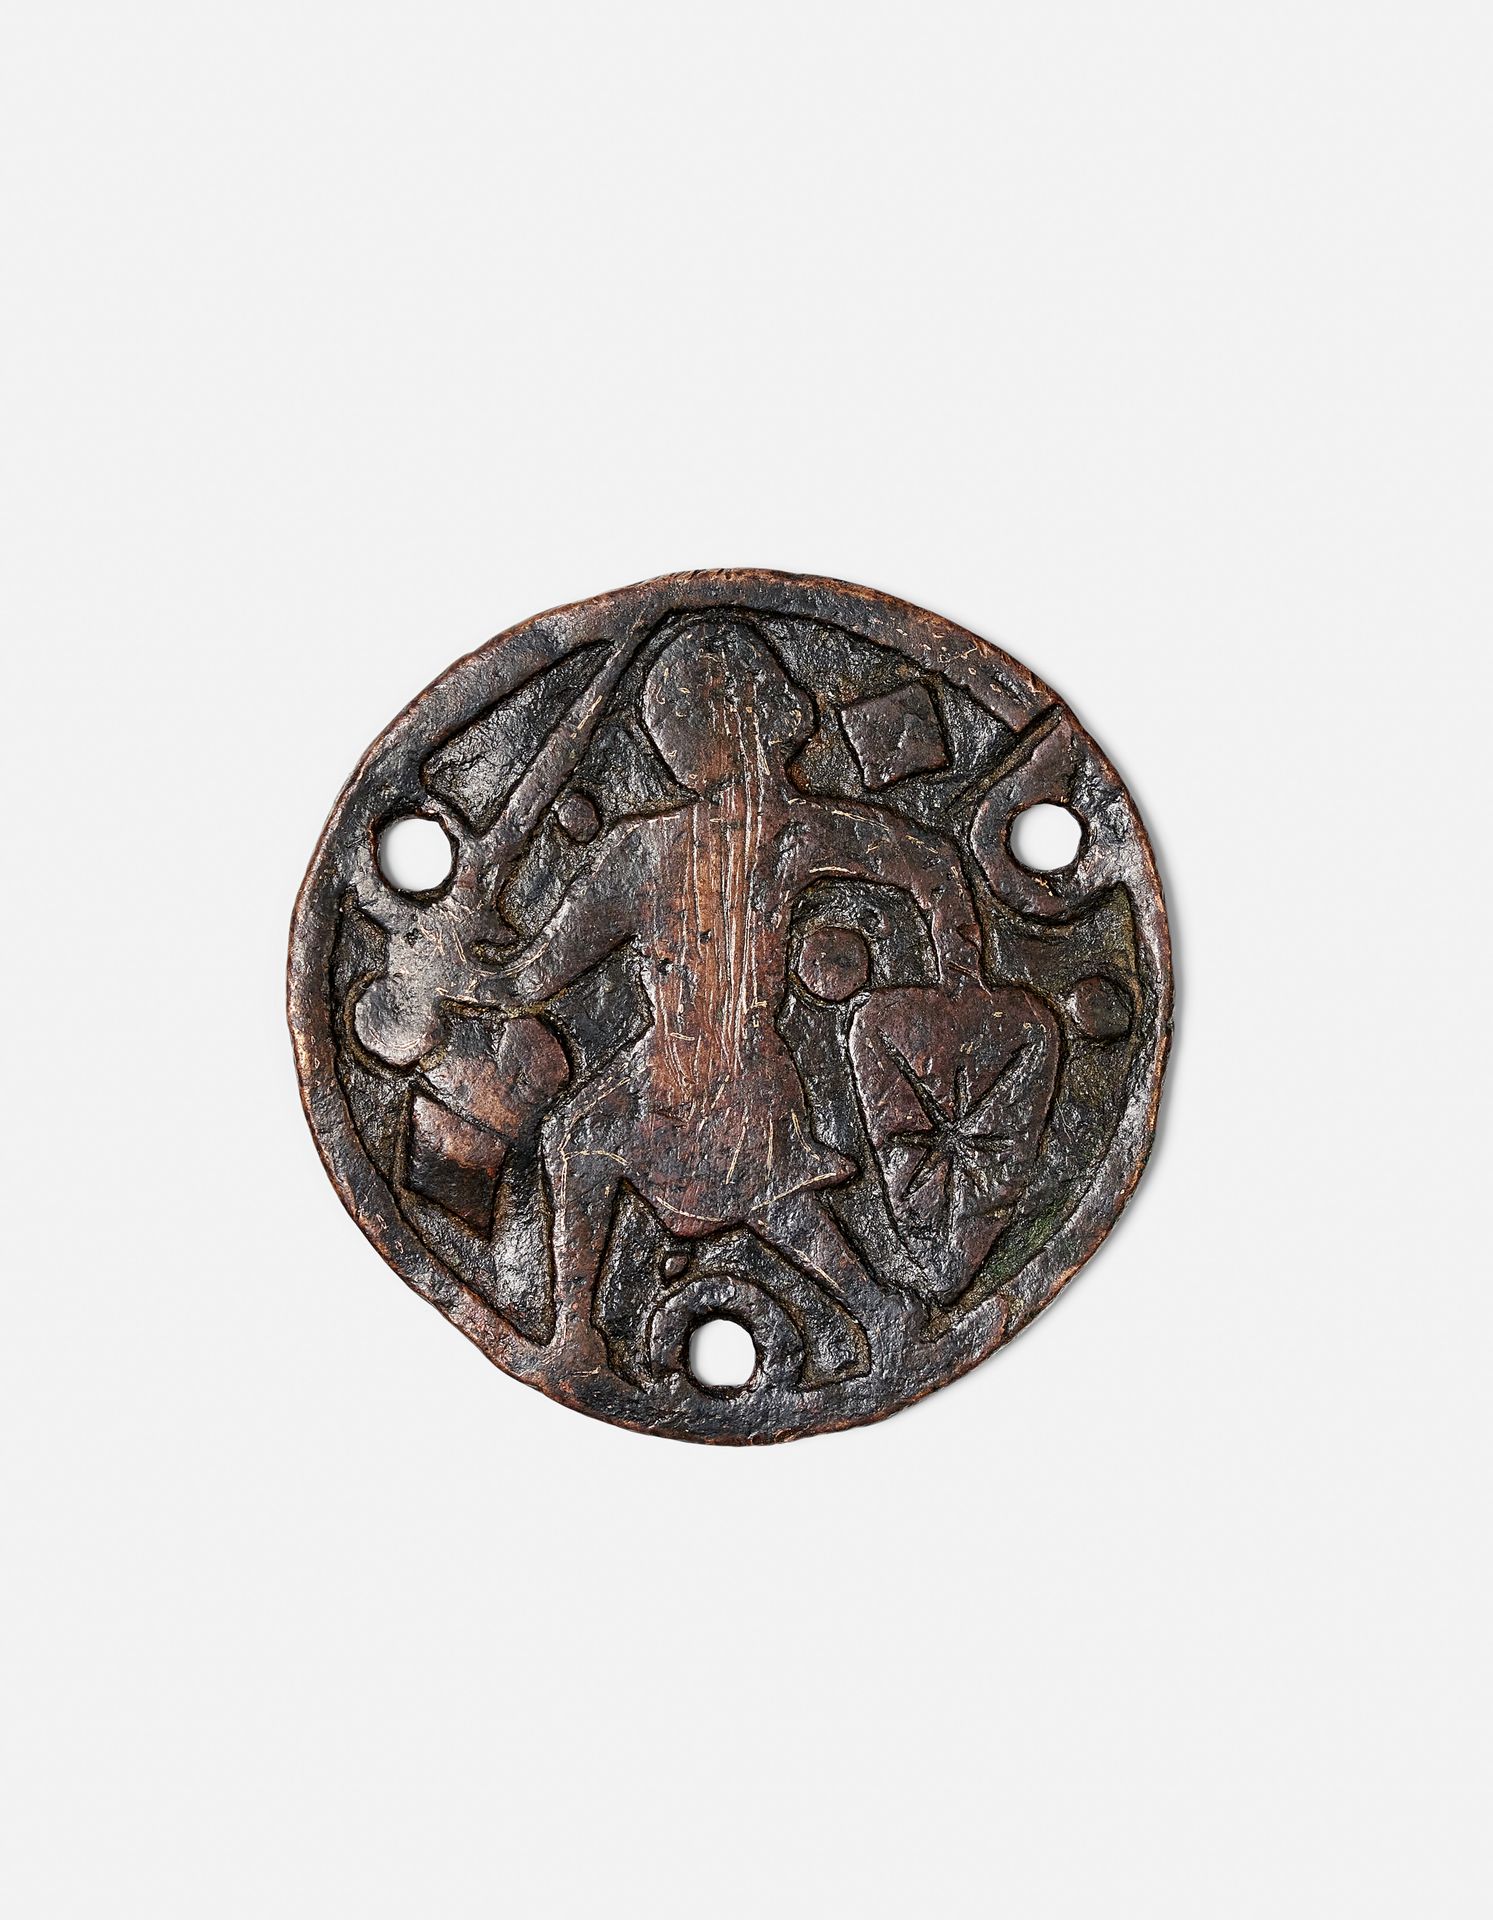 Null RARE SMALL MEDALLION

Limoges, early 13th century 

In champlevé copper, de&hellip;